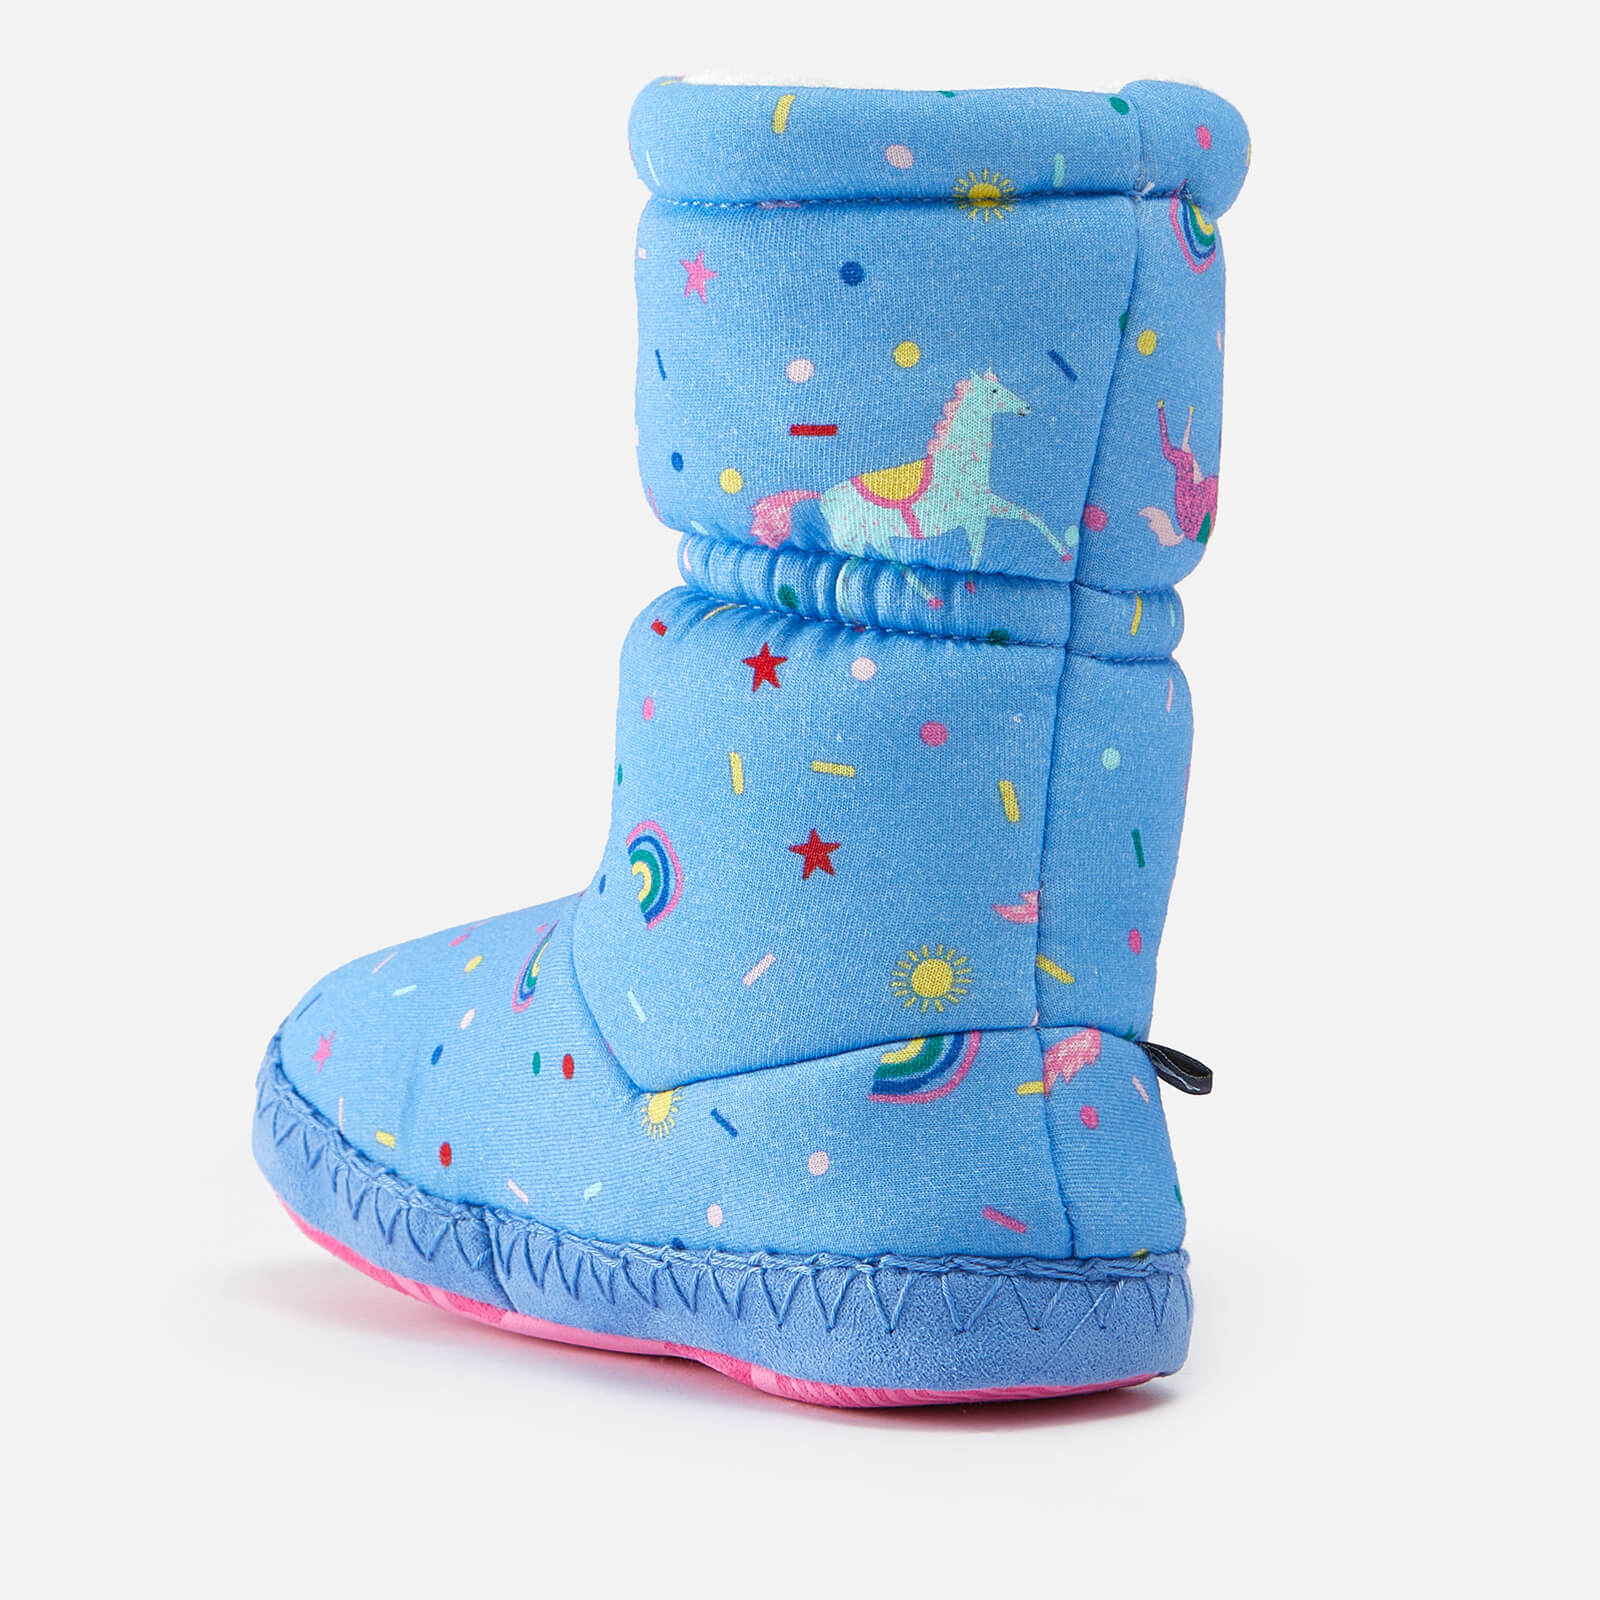 jouleskids padabout jersey and faux fur slipper boots - s